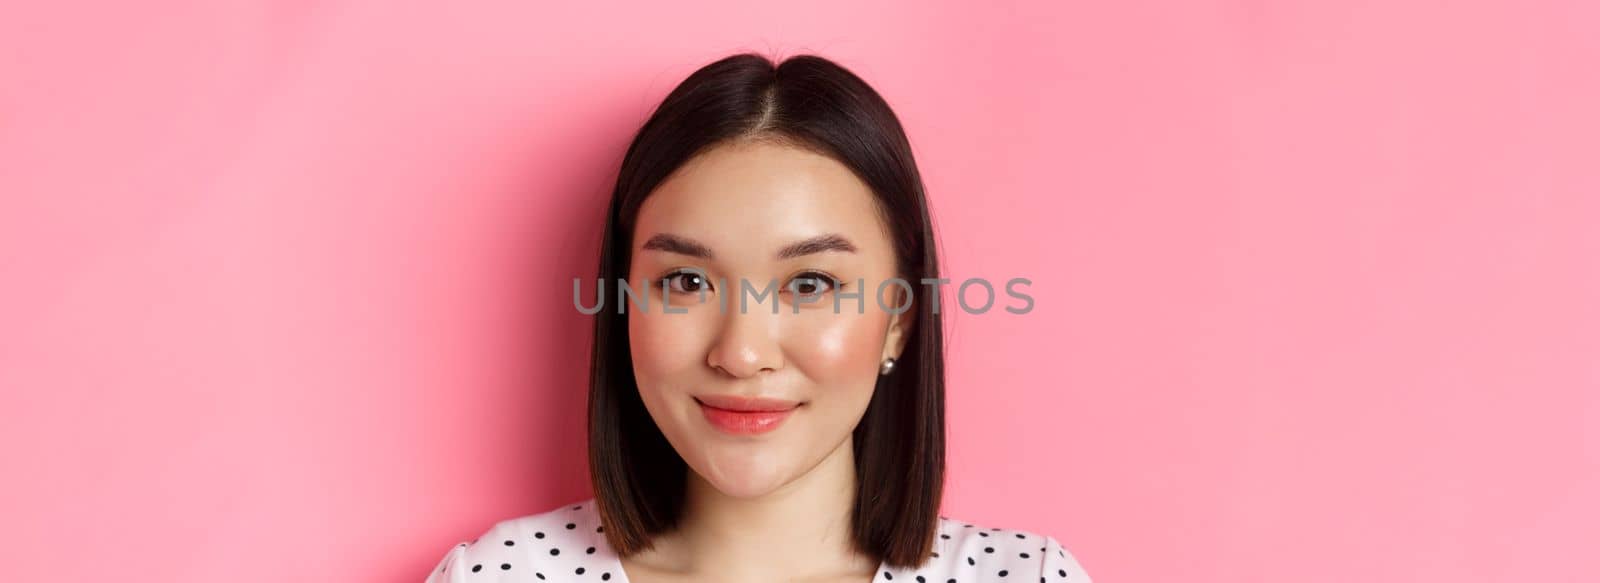 Beauty and lifestyle concept. Headshot of beautiful asian woman smiling, looking at camera happy and romantic, standing against pink background.